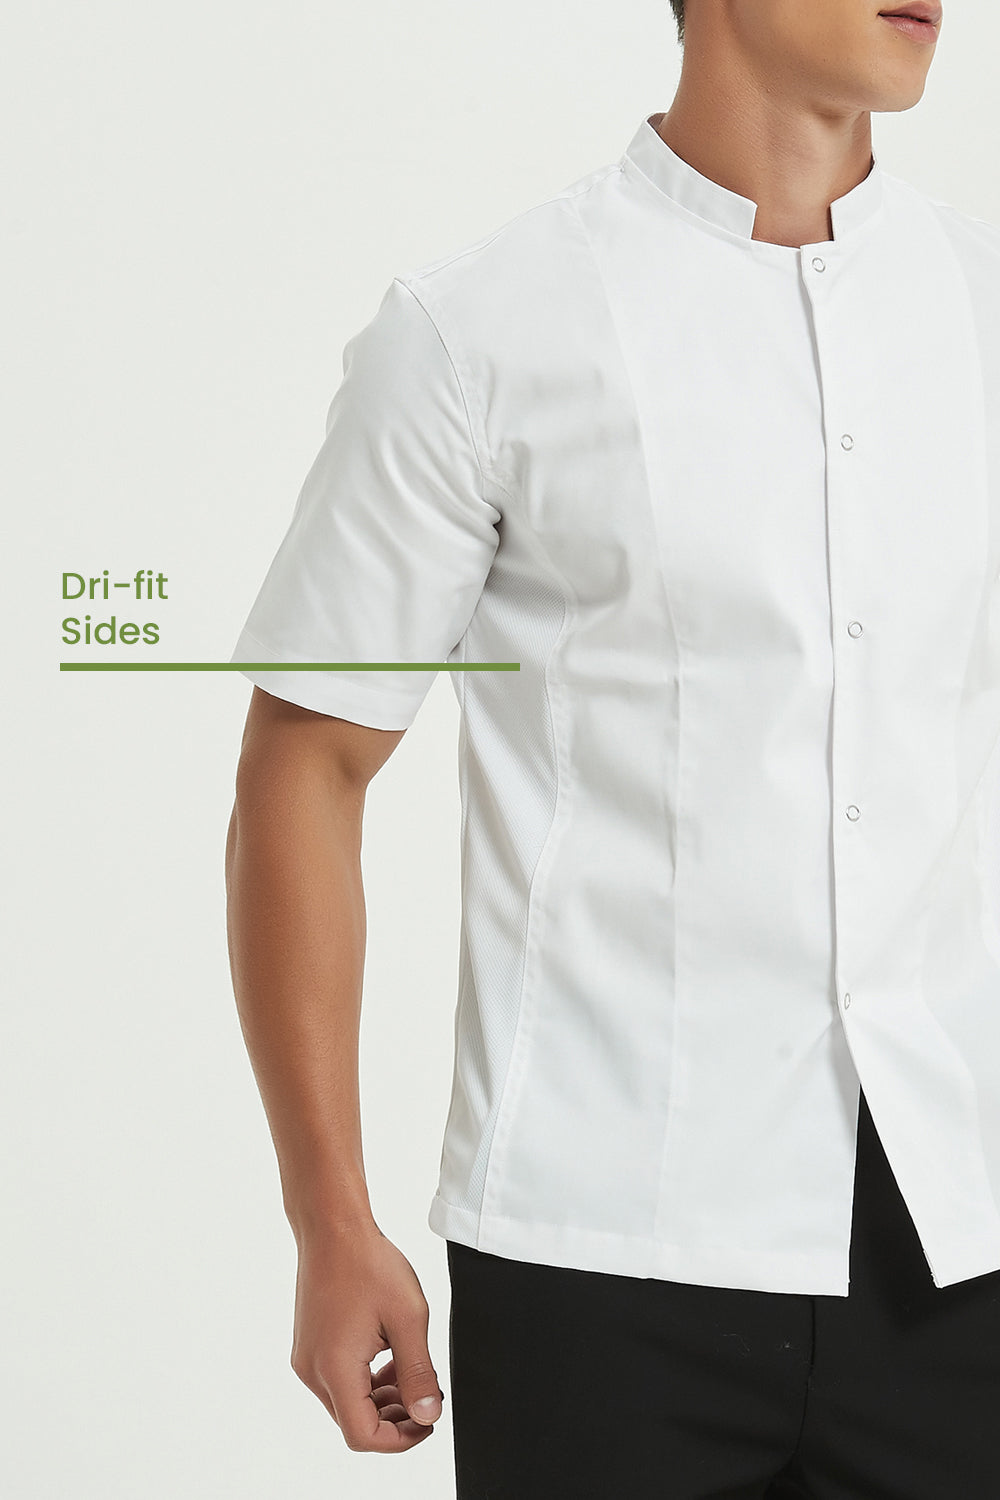 Mint White Chef Jacket with Dri-fit, Side View